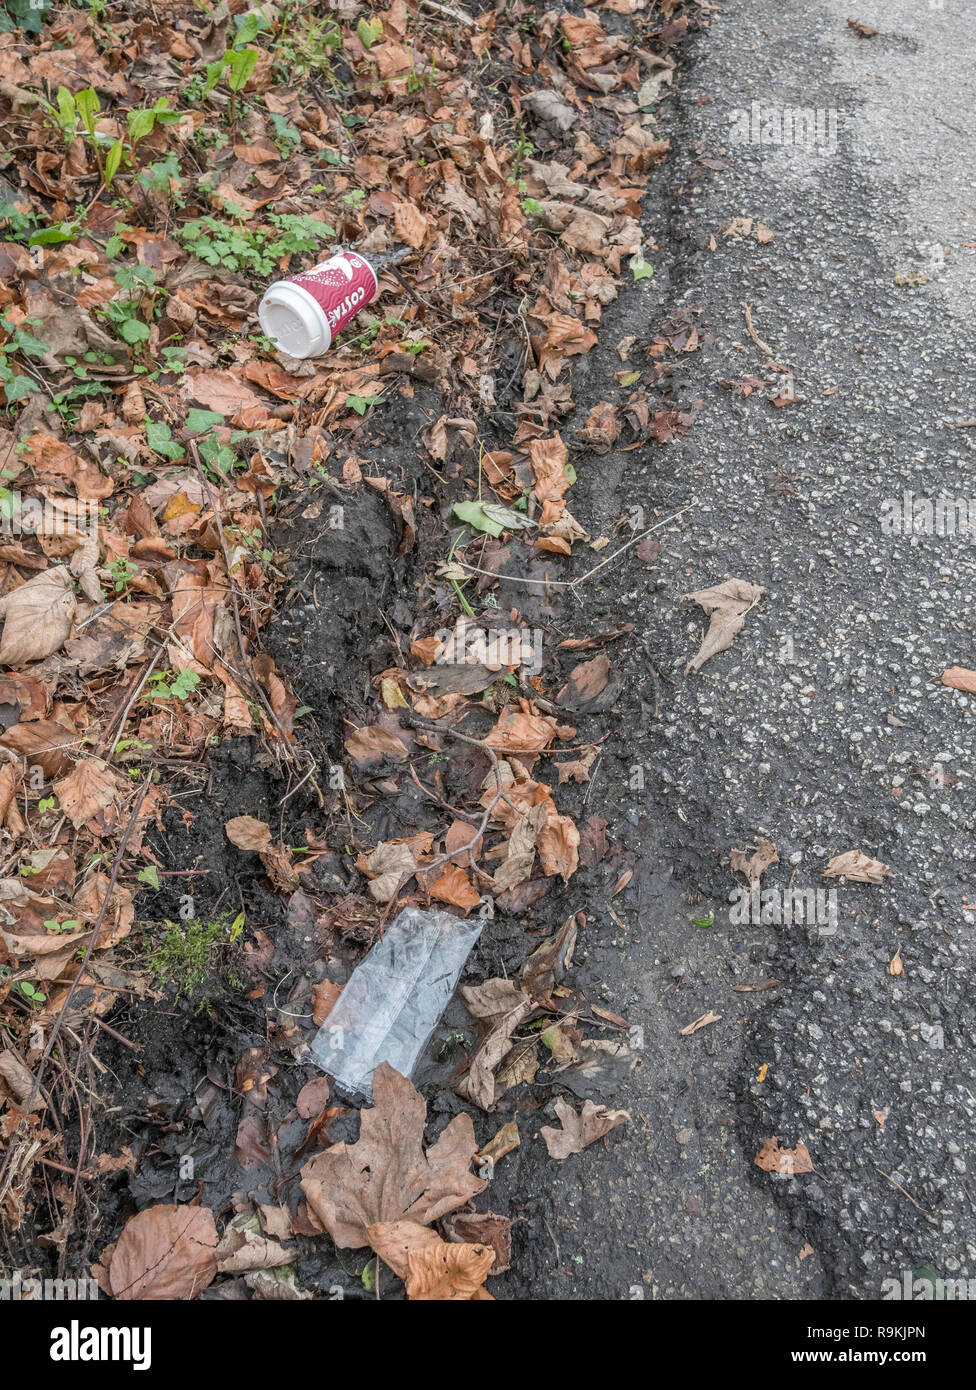 Plastic rubbish discarded beside in rural road hedgerow. Metaphor plastic pollution, environmental pollution, war on plastic waste, plastic rubbish. Stock Photo